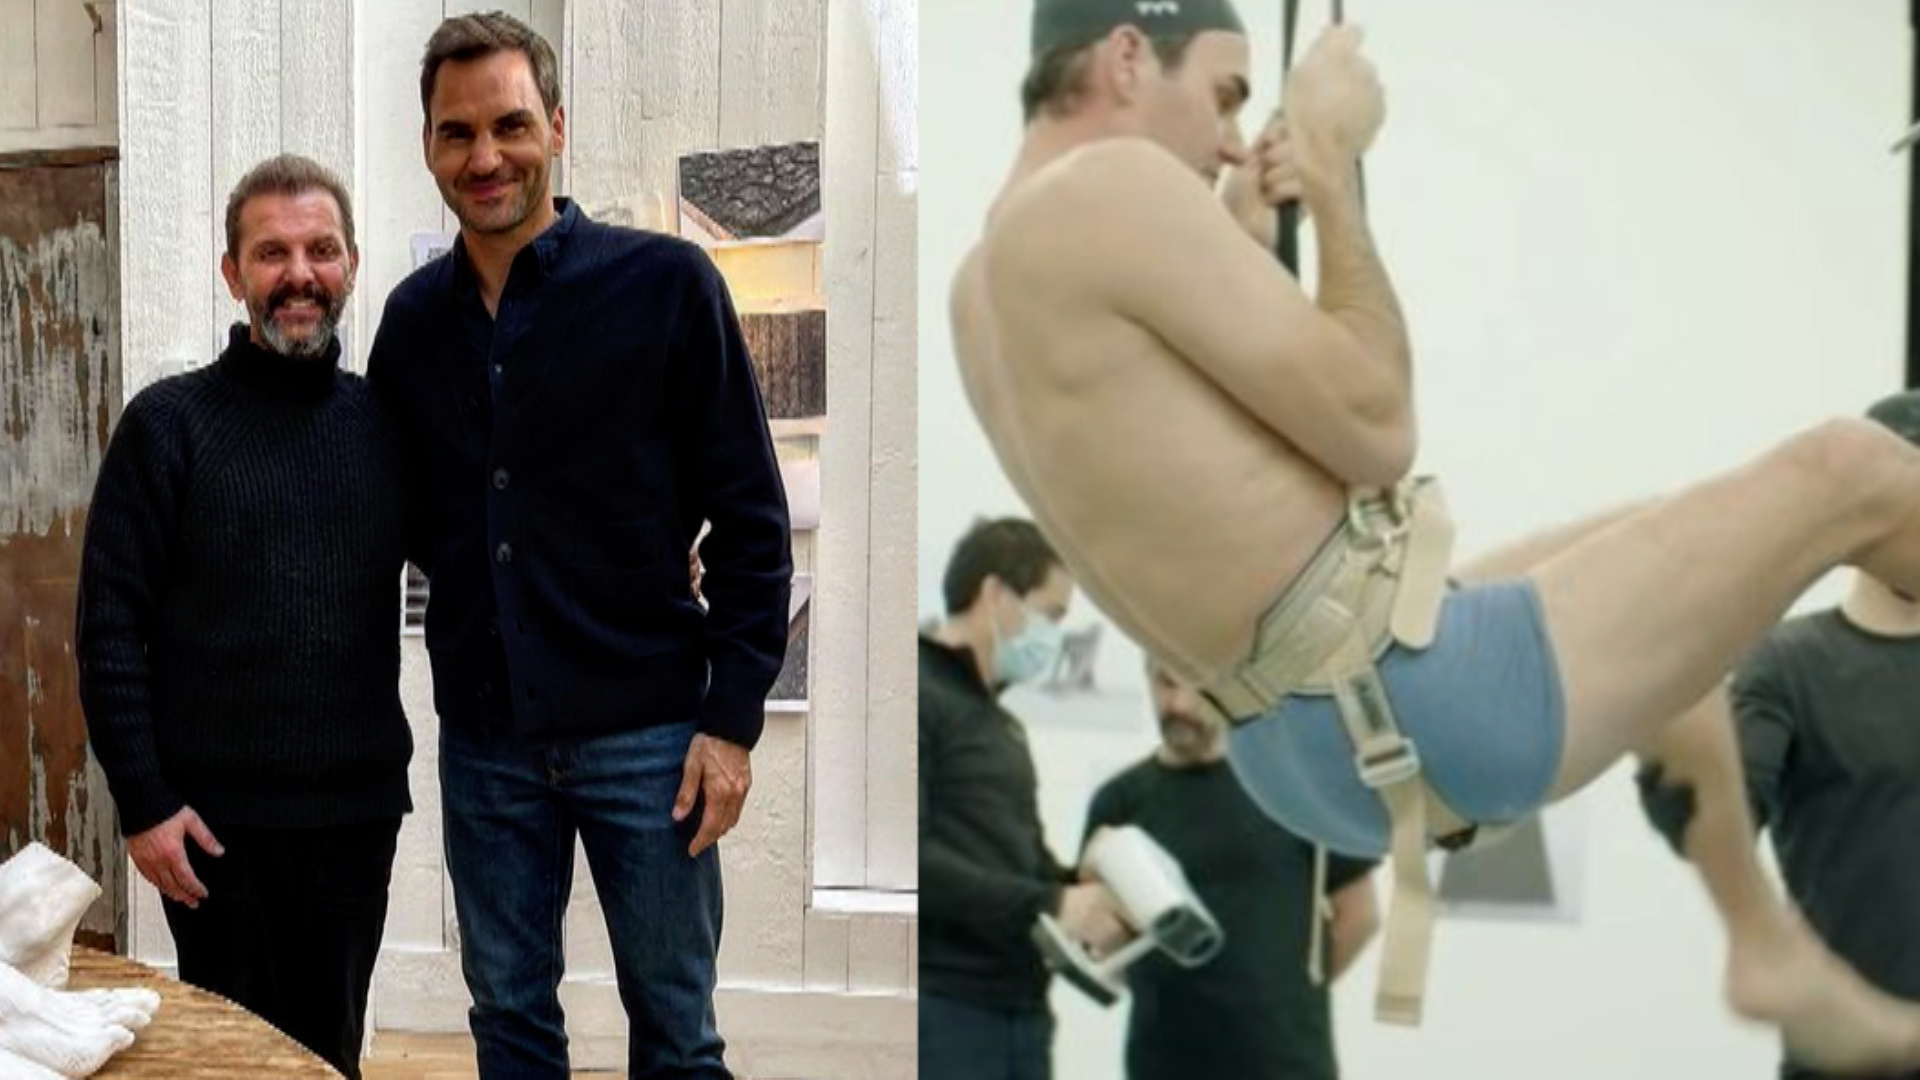 Roger Federer has every inch of his body sculpted for hours for curious art project